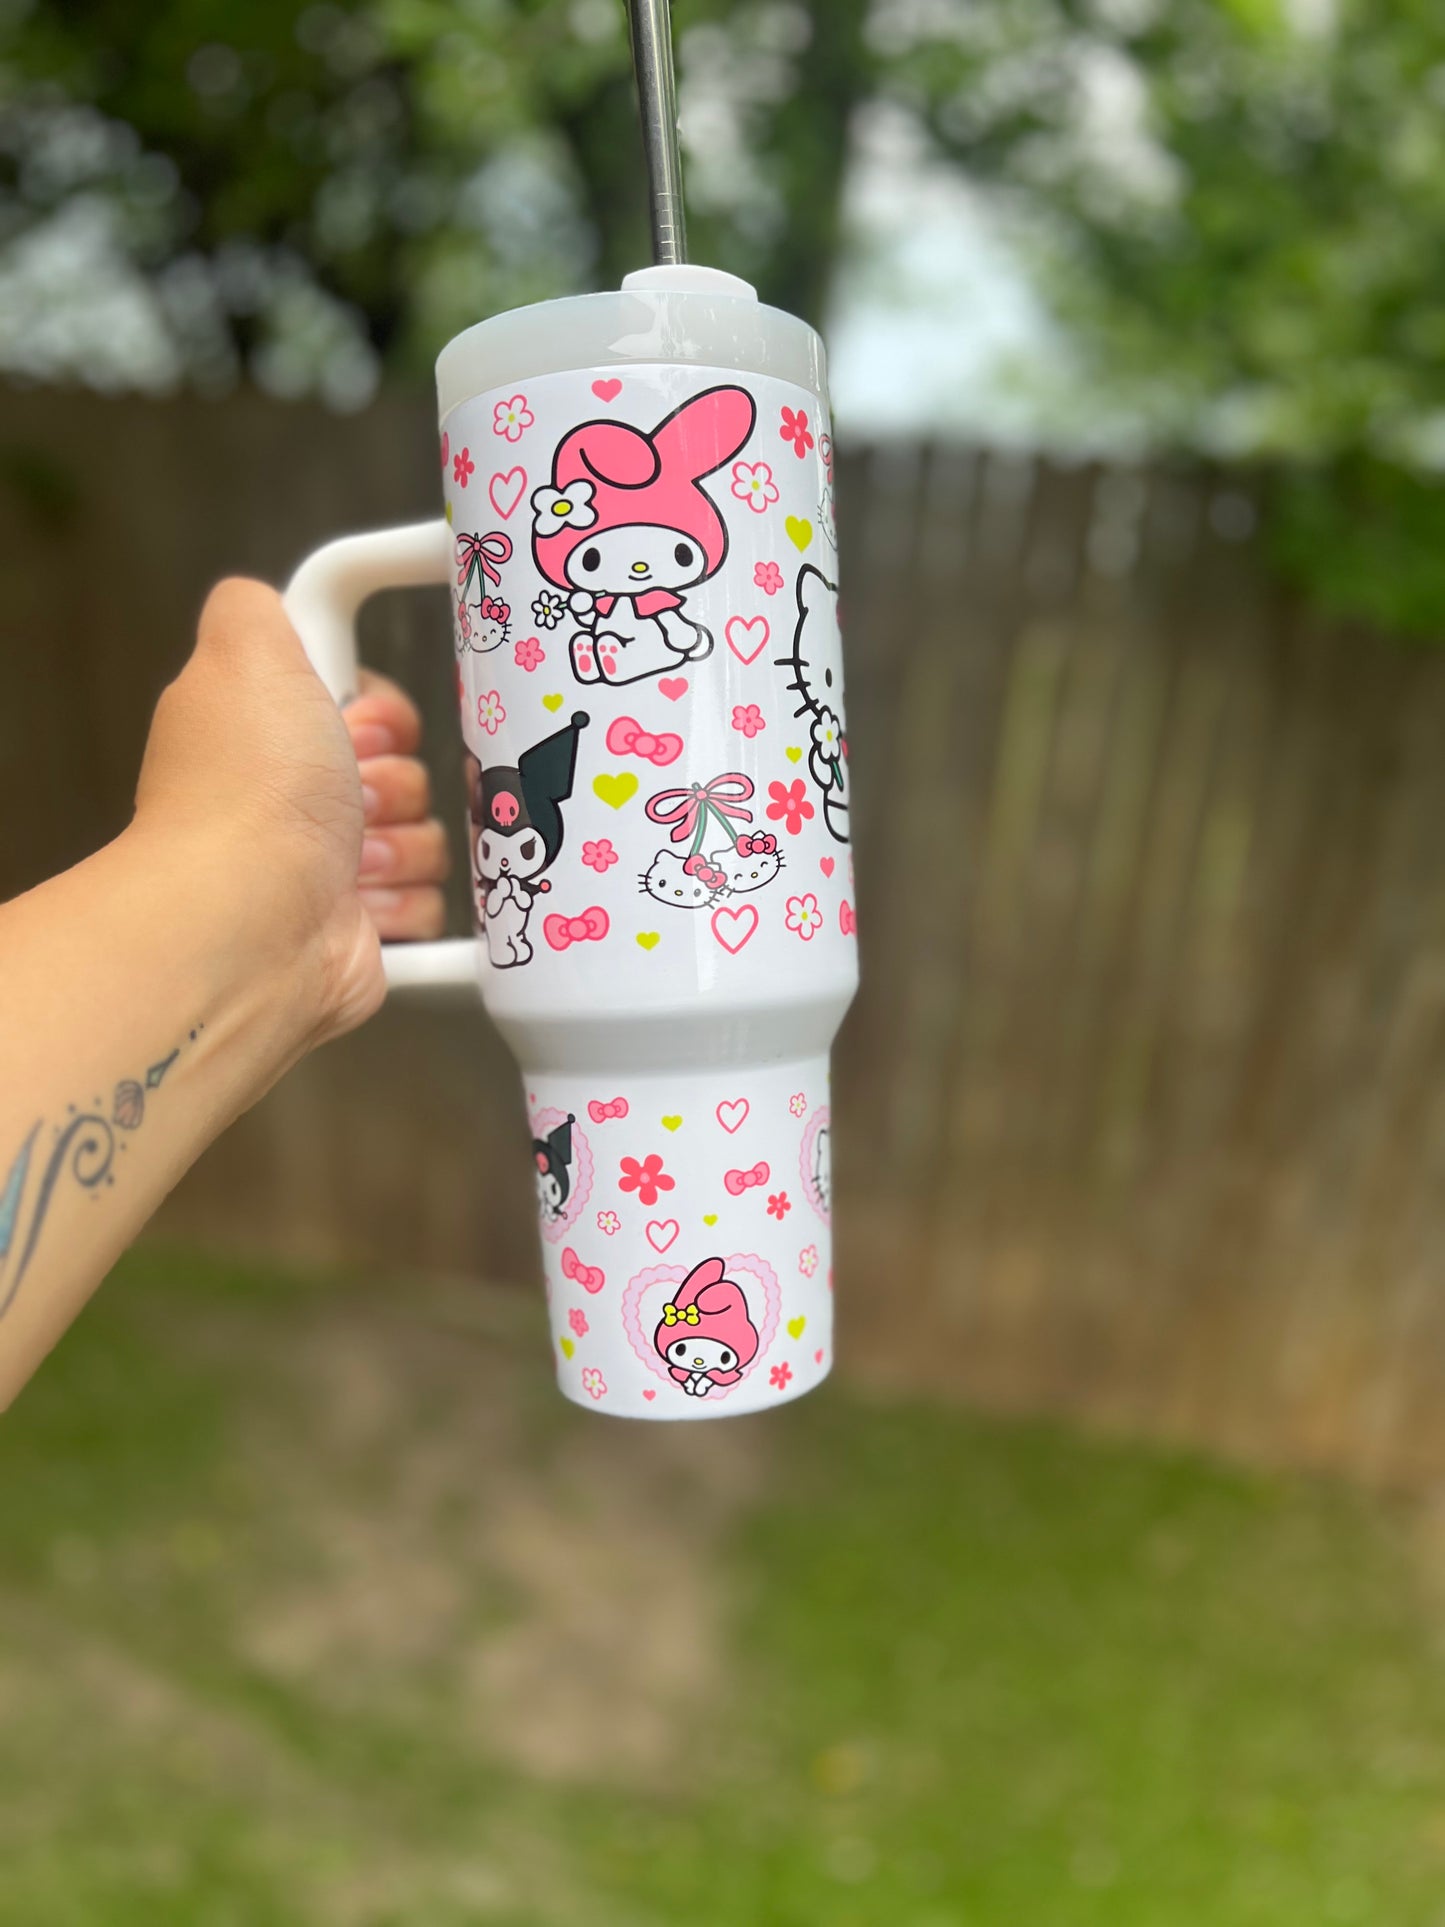 Sanrio Kitty and friends spring time 40oz tumbler